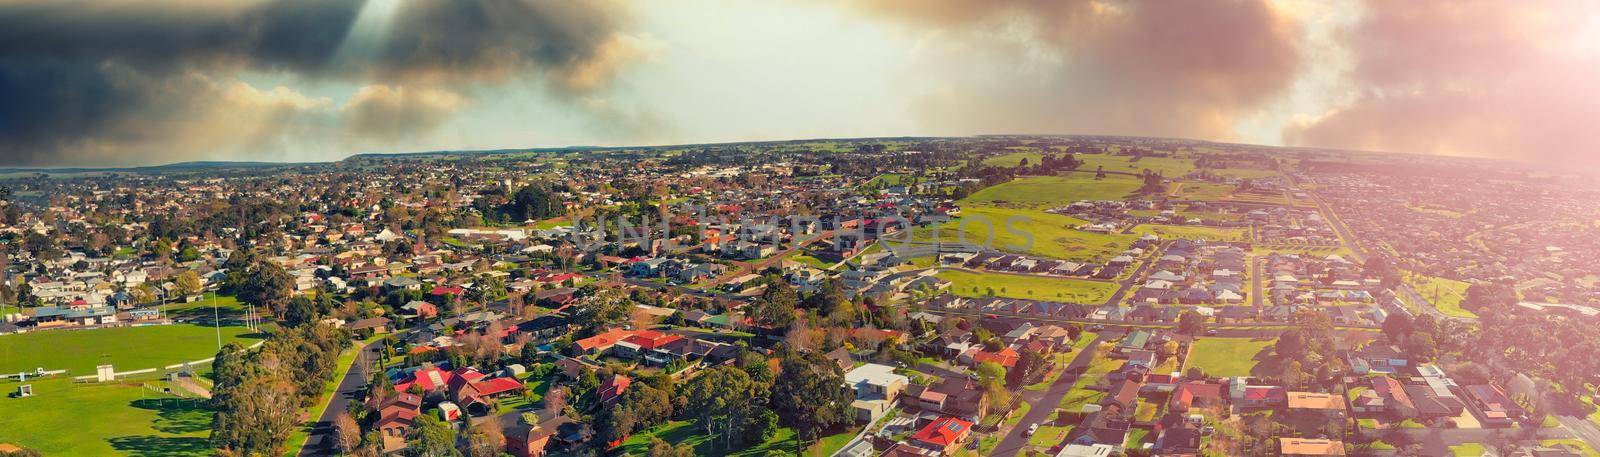 Panoramic aerial view of Mt Gambier skyline on a beautiful day, Australia by jovannig